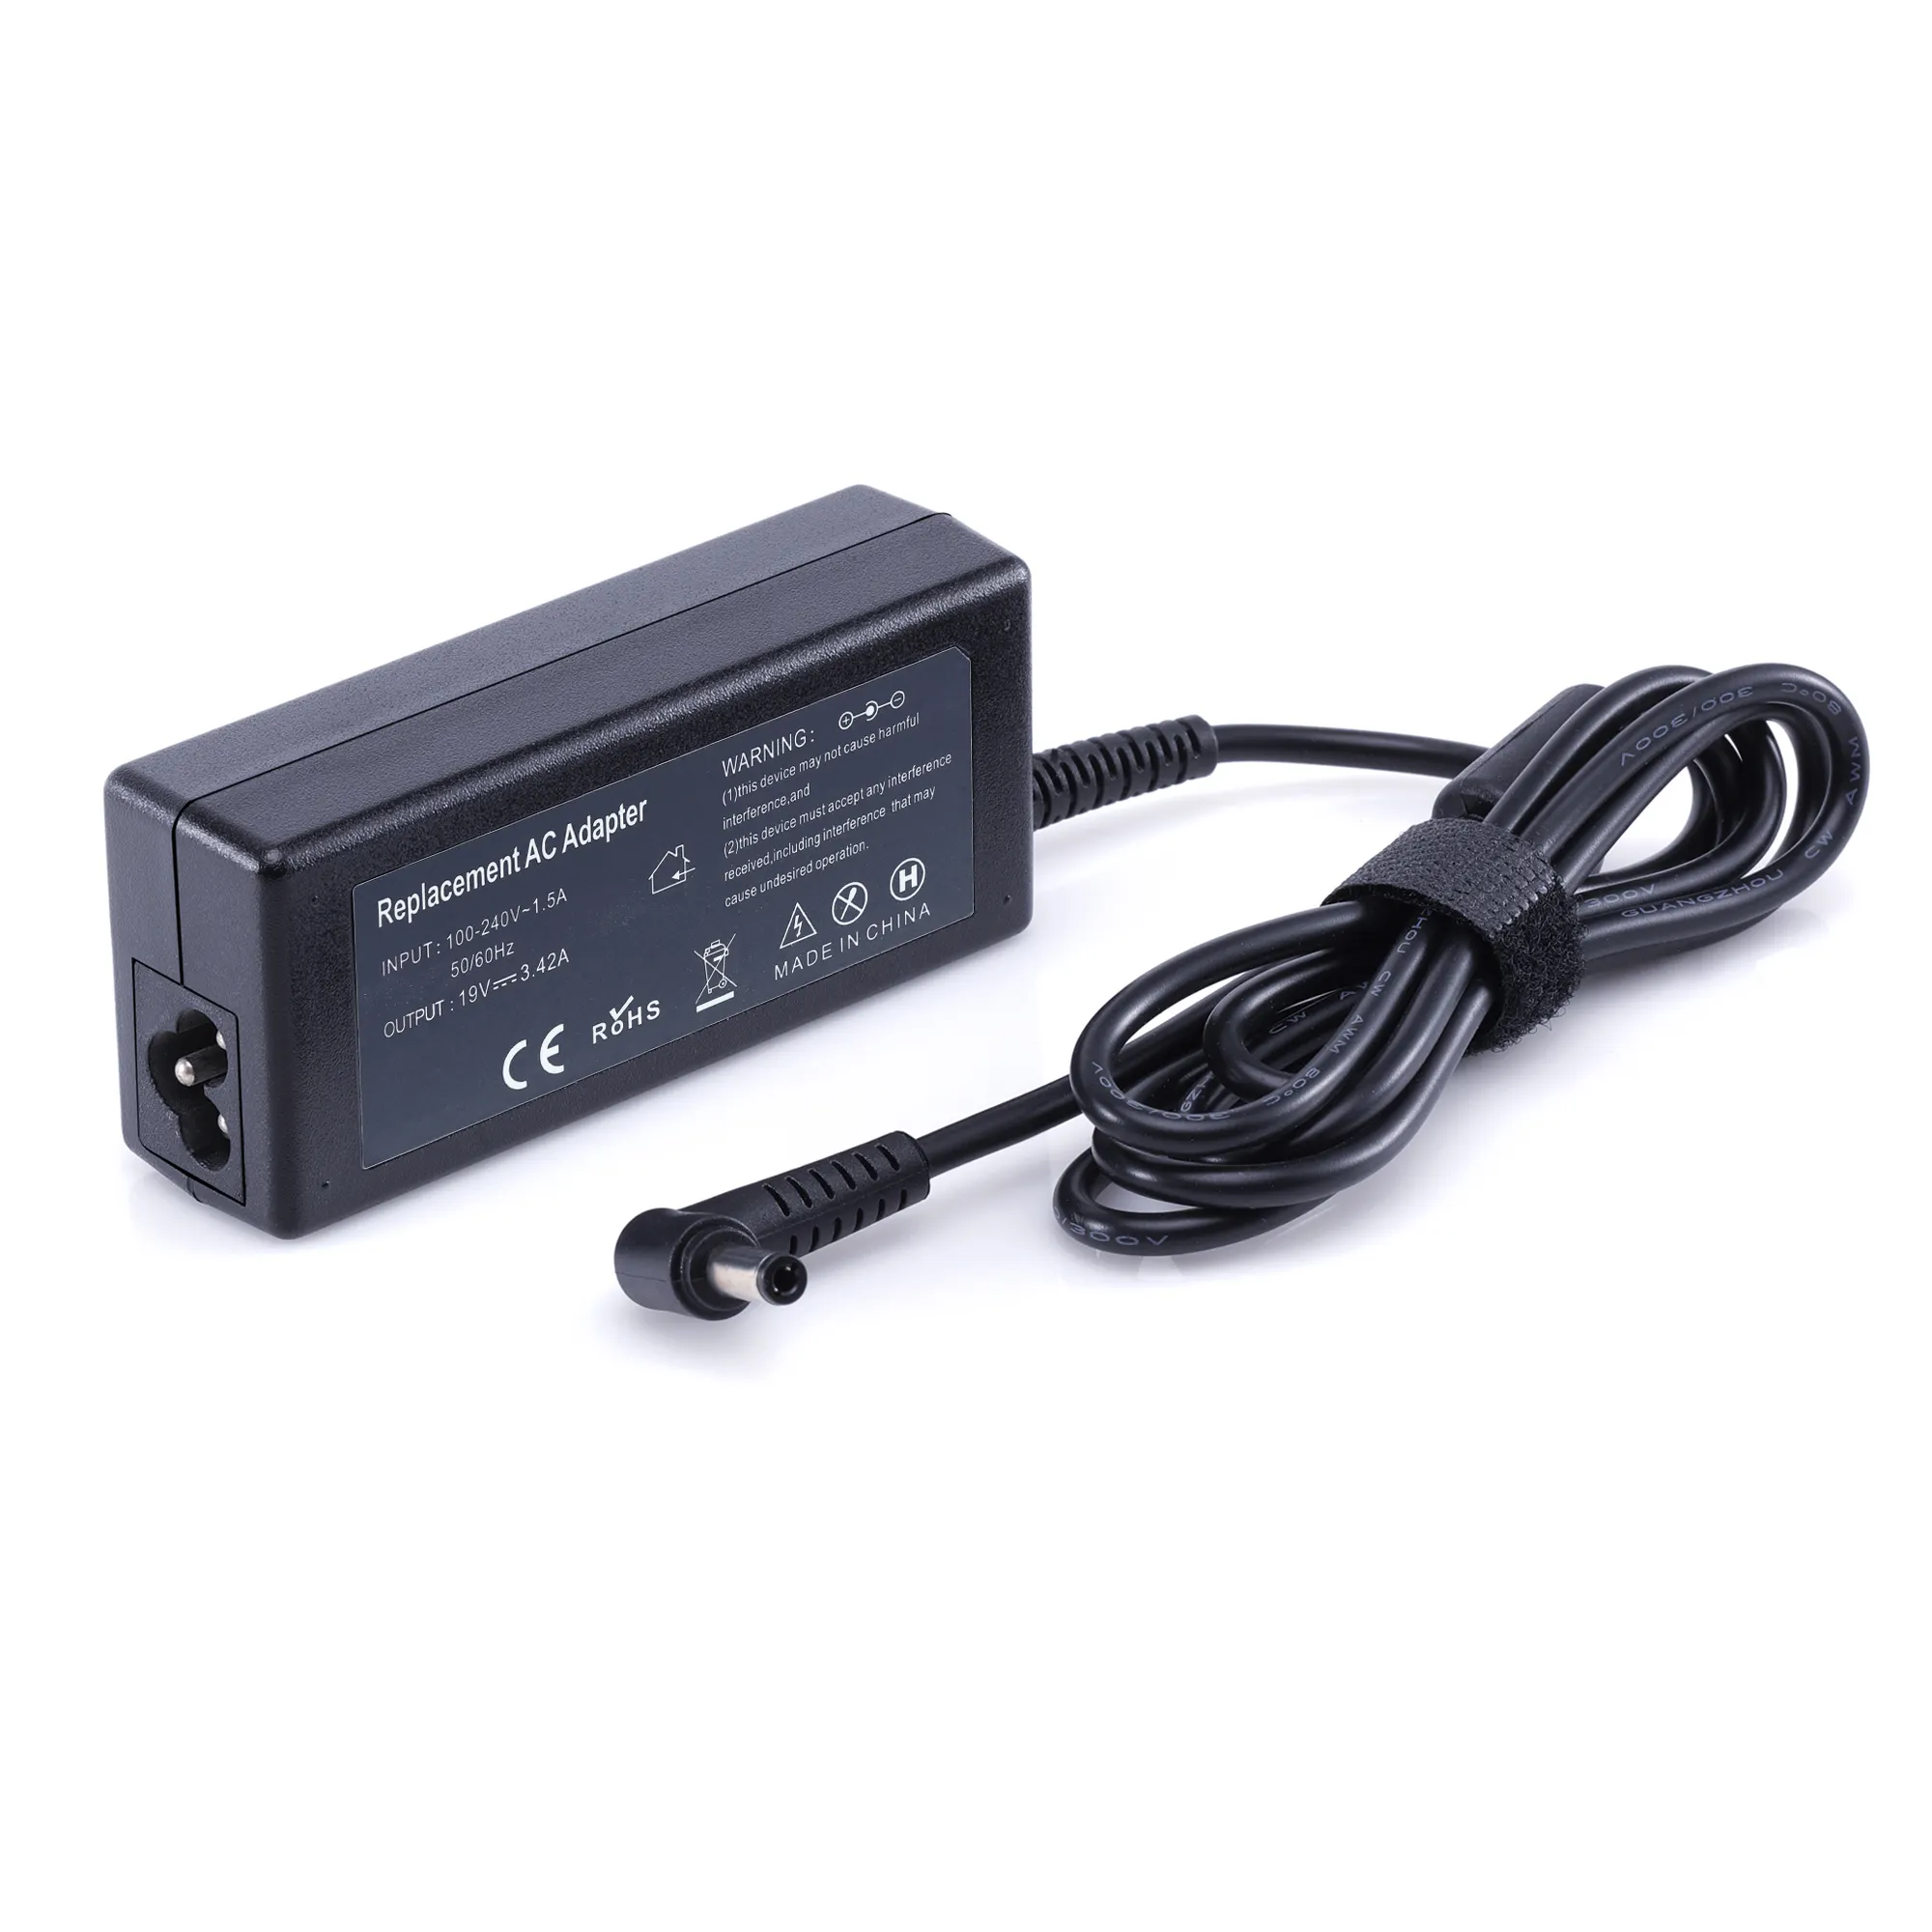 Hot Sale Power Adapter 65W 19V 3.42A 5.5*2.5mm Laptop AC Adapter Charger For TOSHIBA Notebook